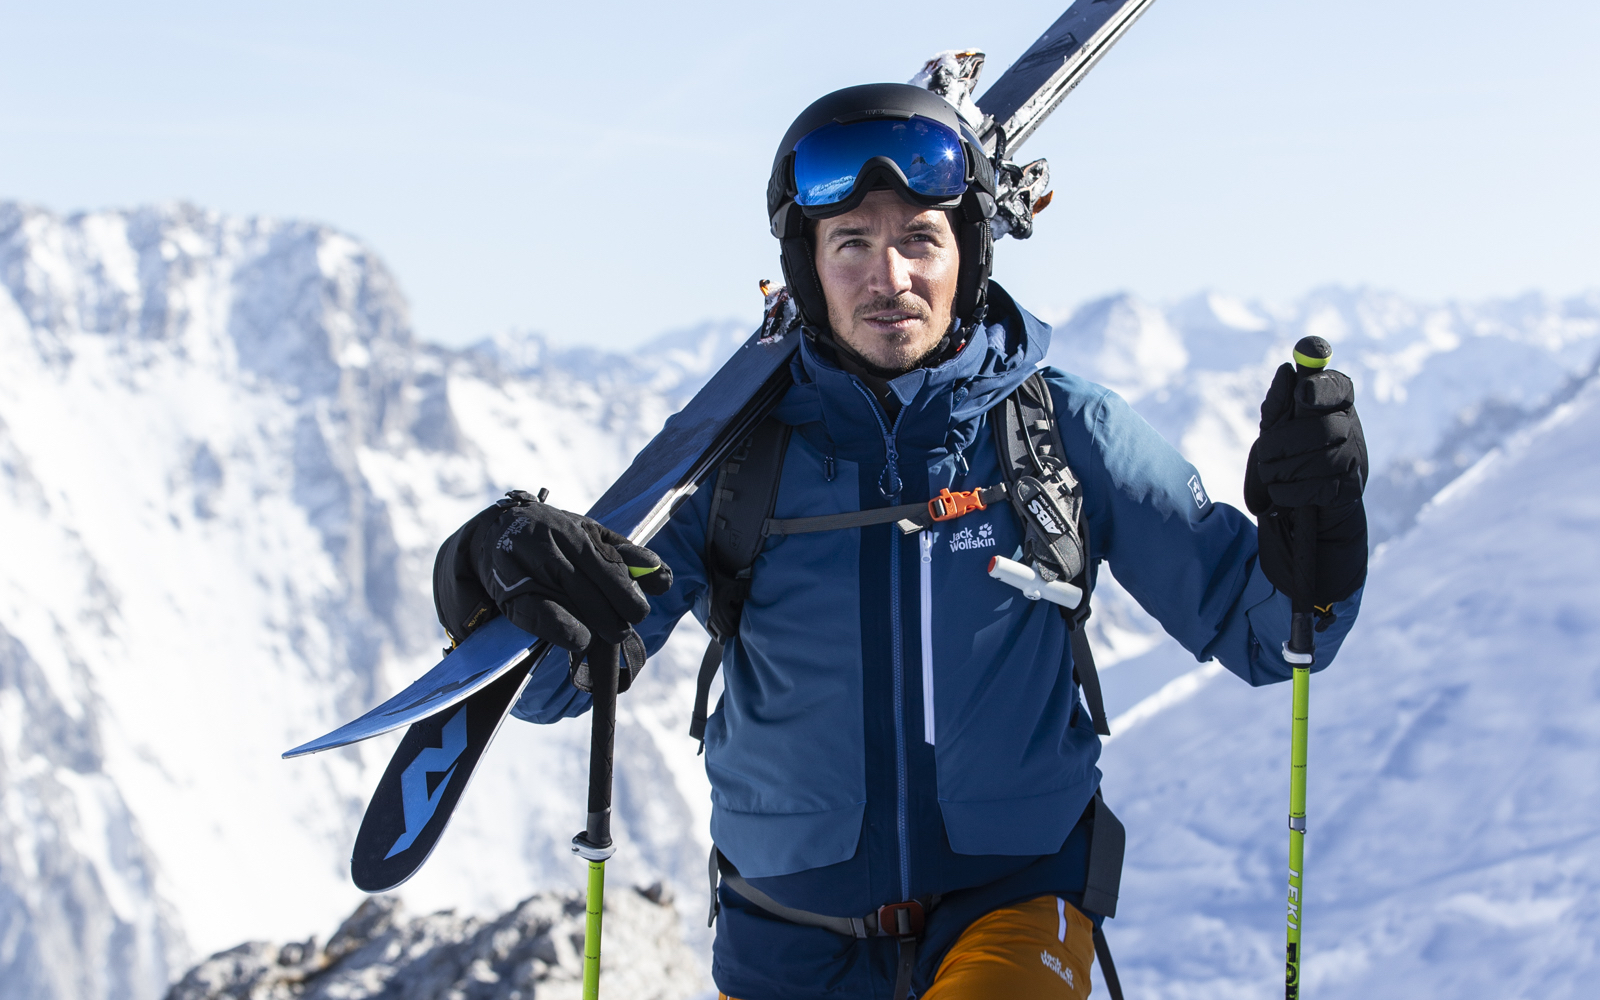 reference game crane Felix Neureuther - The jack-of-all-trades is coming to ISPO Munich 2020